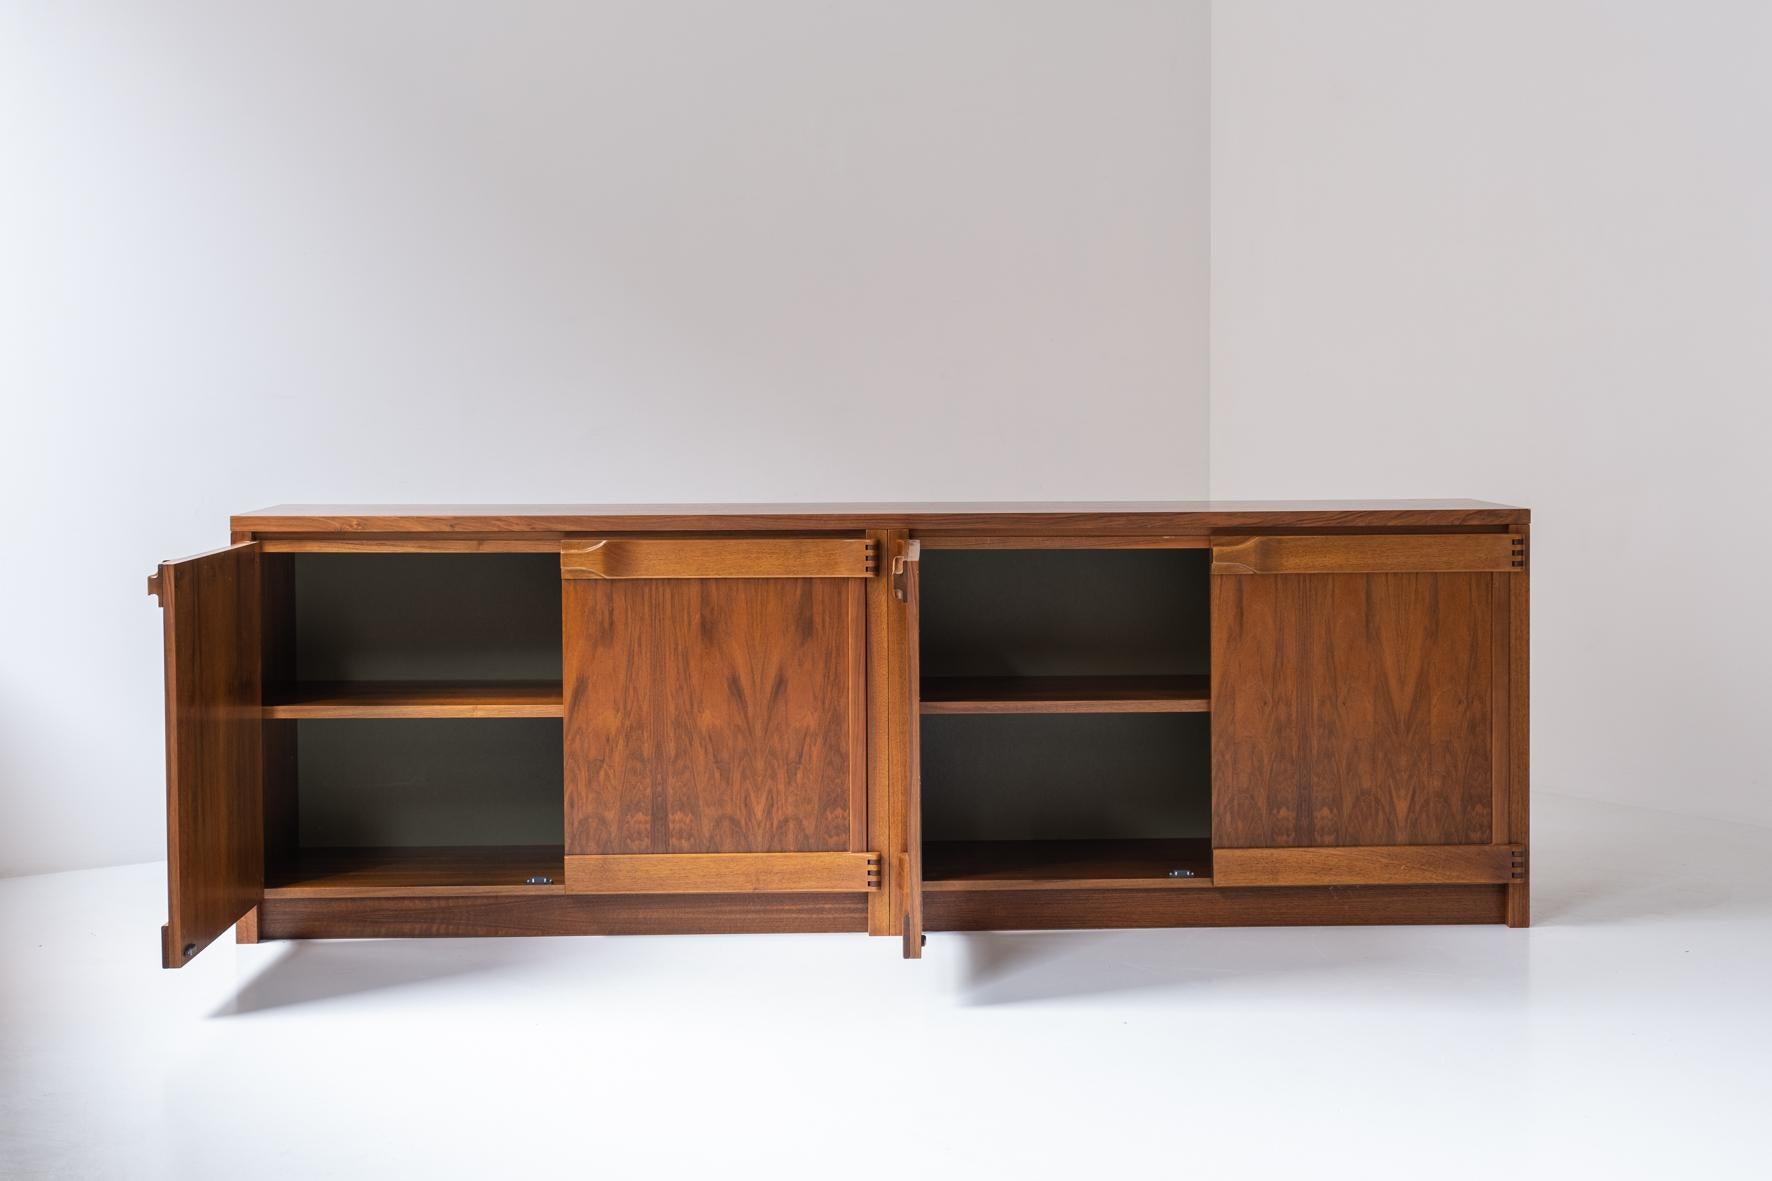 Exquisite sideboard by Franz Xaver Sproll, designed and manufactured in Switzerland around the 1960s. This rare credenza features four doors covering plenty of storage area with adjustable shelves inside. Great craftsmanship when you notice the